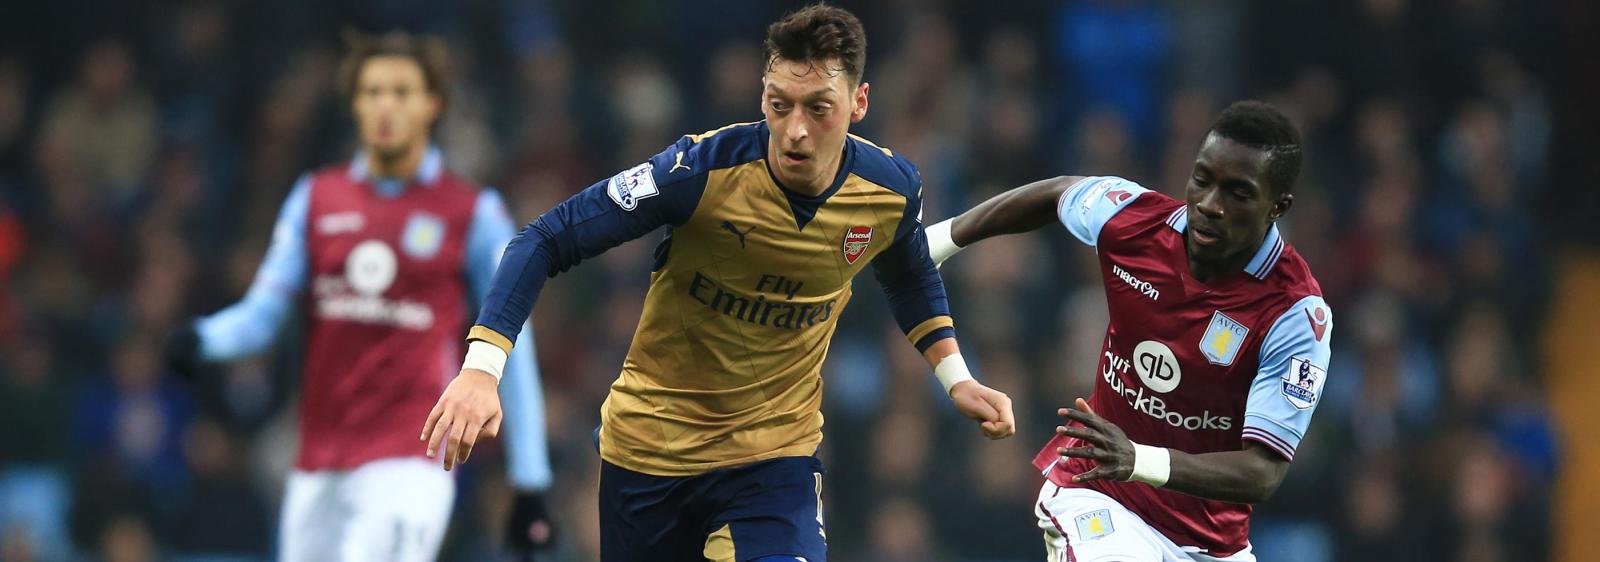 Do you prefer the new Mesut Ozil, or the old one?